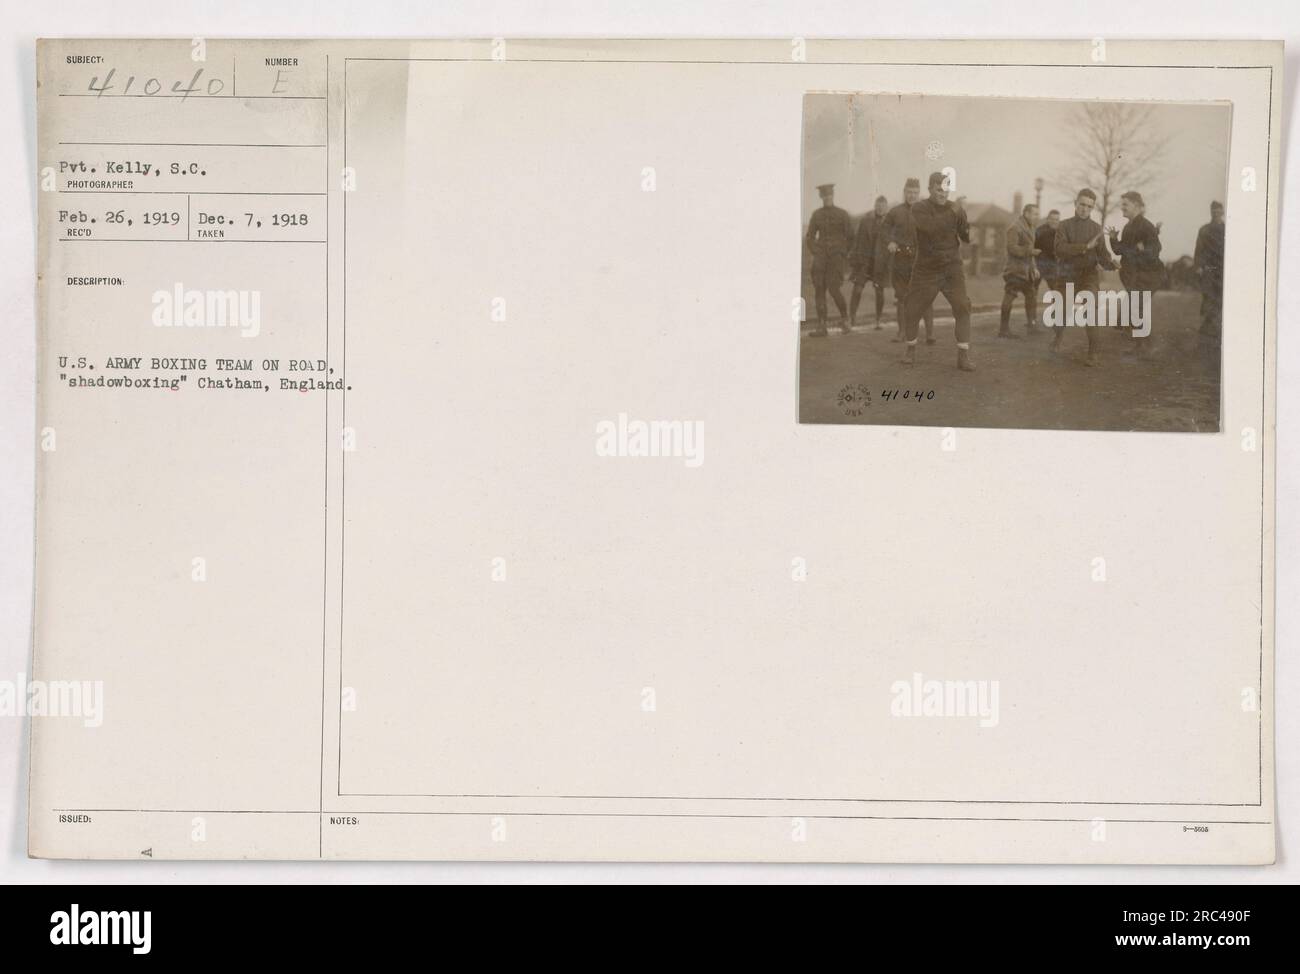 A photograph taken by Pvt. Kelly on February 26, 1919, documents the U.S. Army Boxing Team during their stay in Chatham, England. The image captures the team engaged in 'shadowboxing' as part of their training. This photograph is assigned the unique identification number 41040. Stock Photo